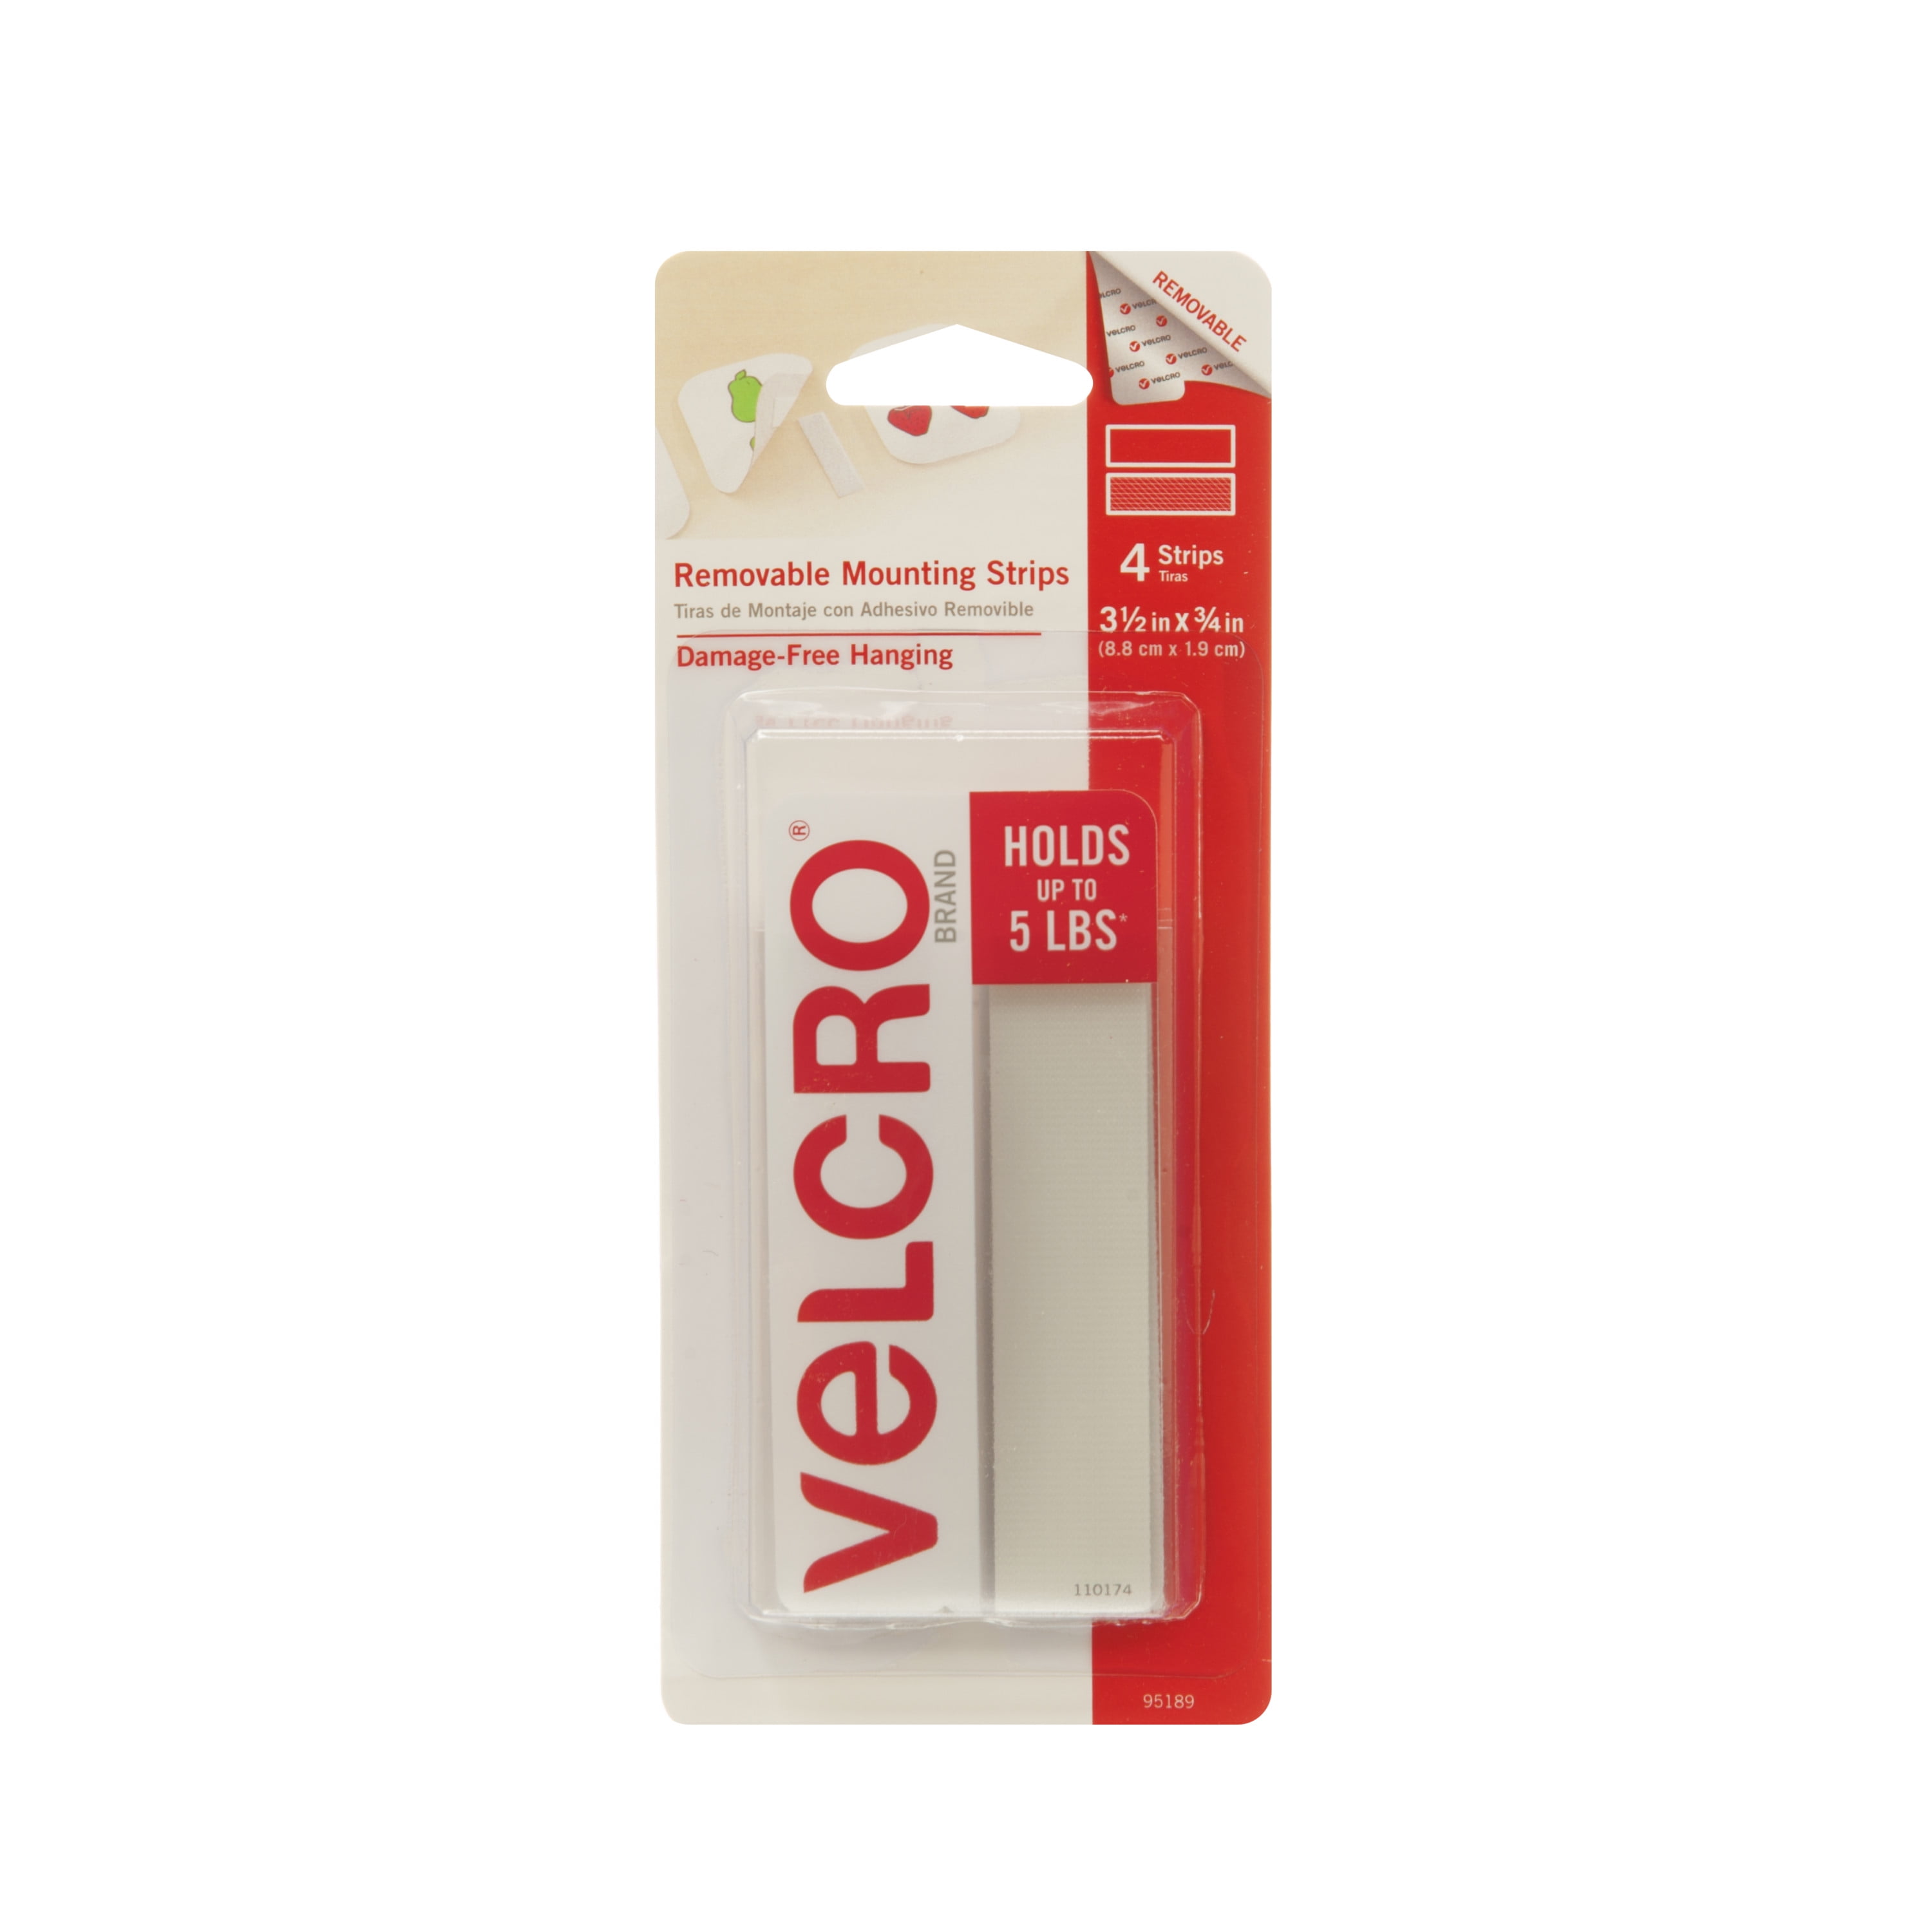 VELCRO® Stick On Self Adhesive Mounting Tape Strips Coin Hook and Loop And More. 